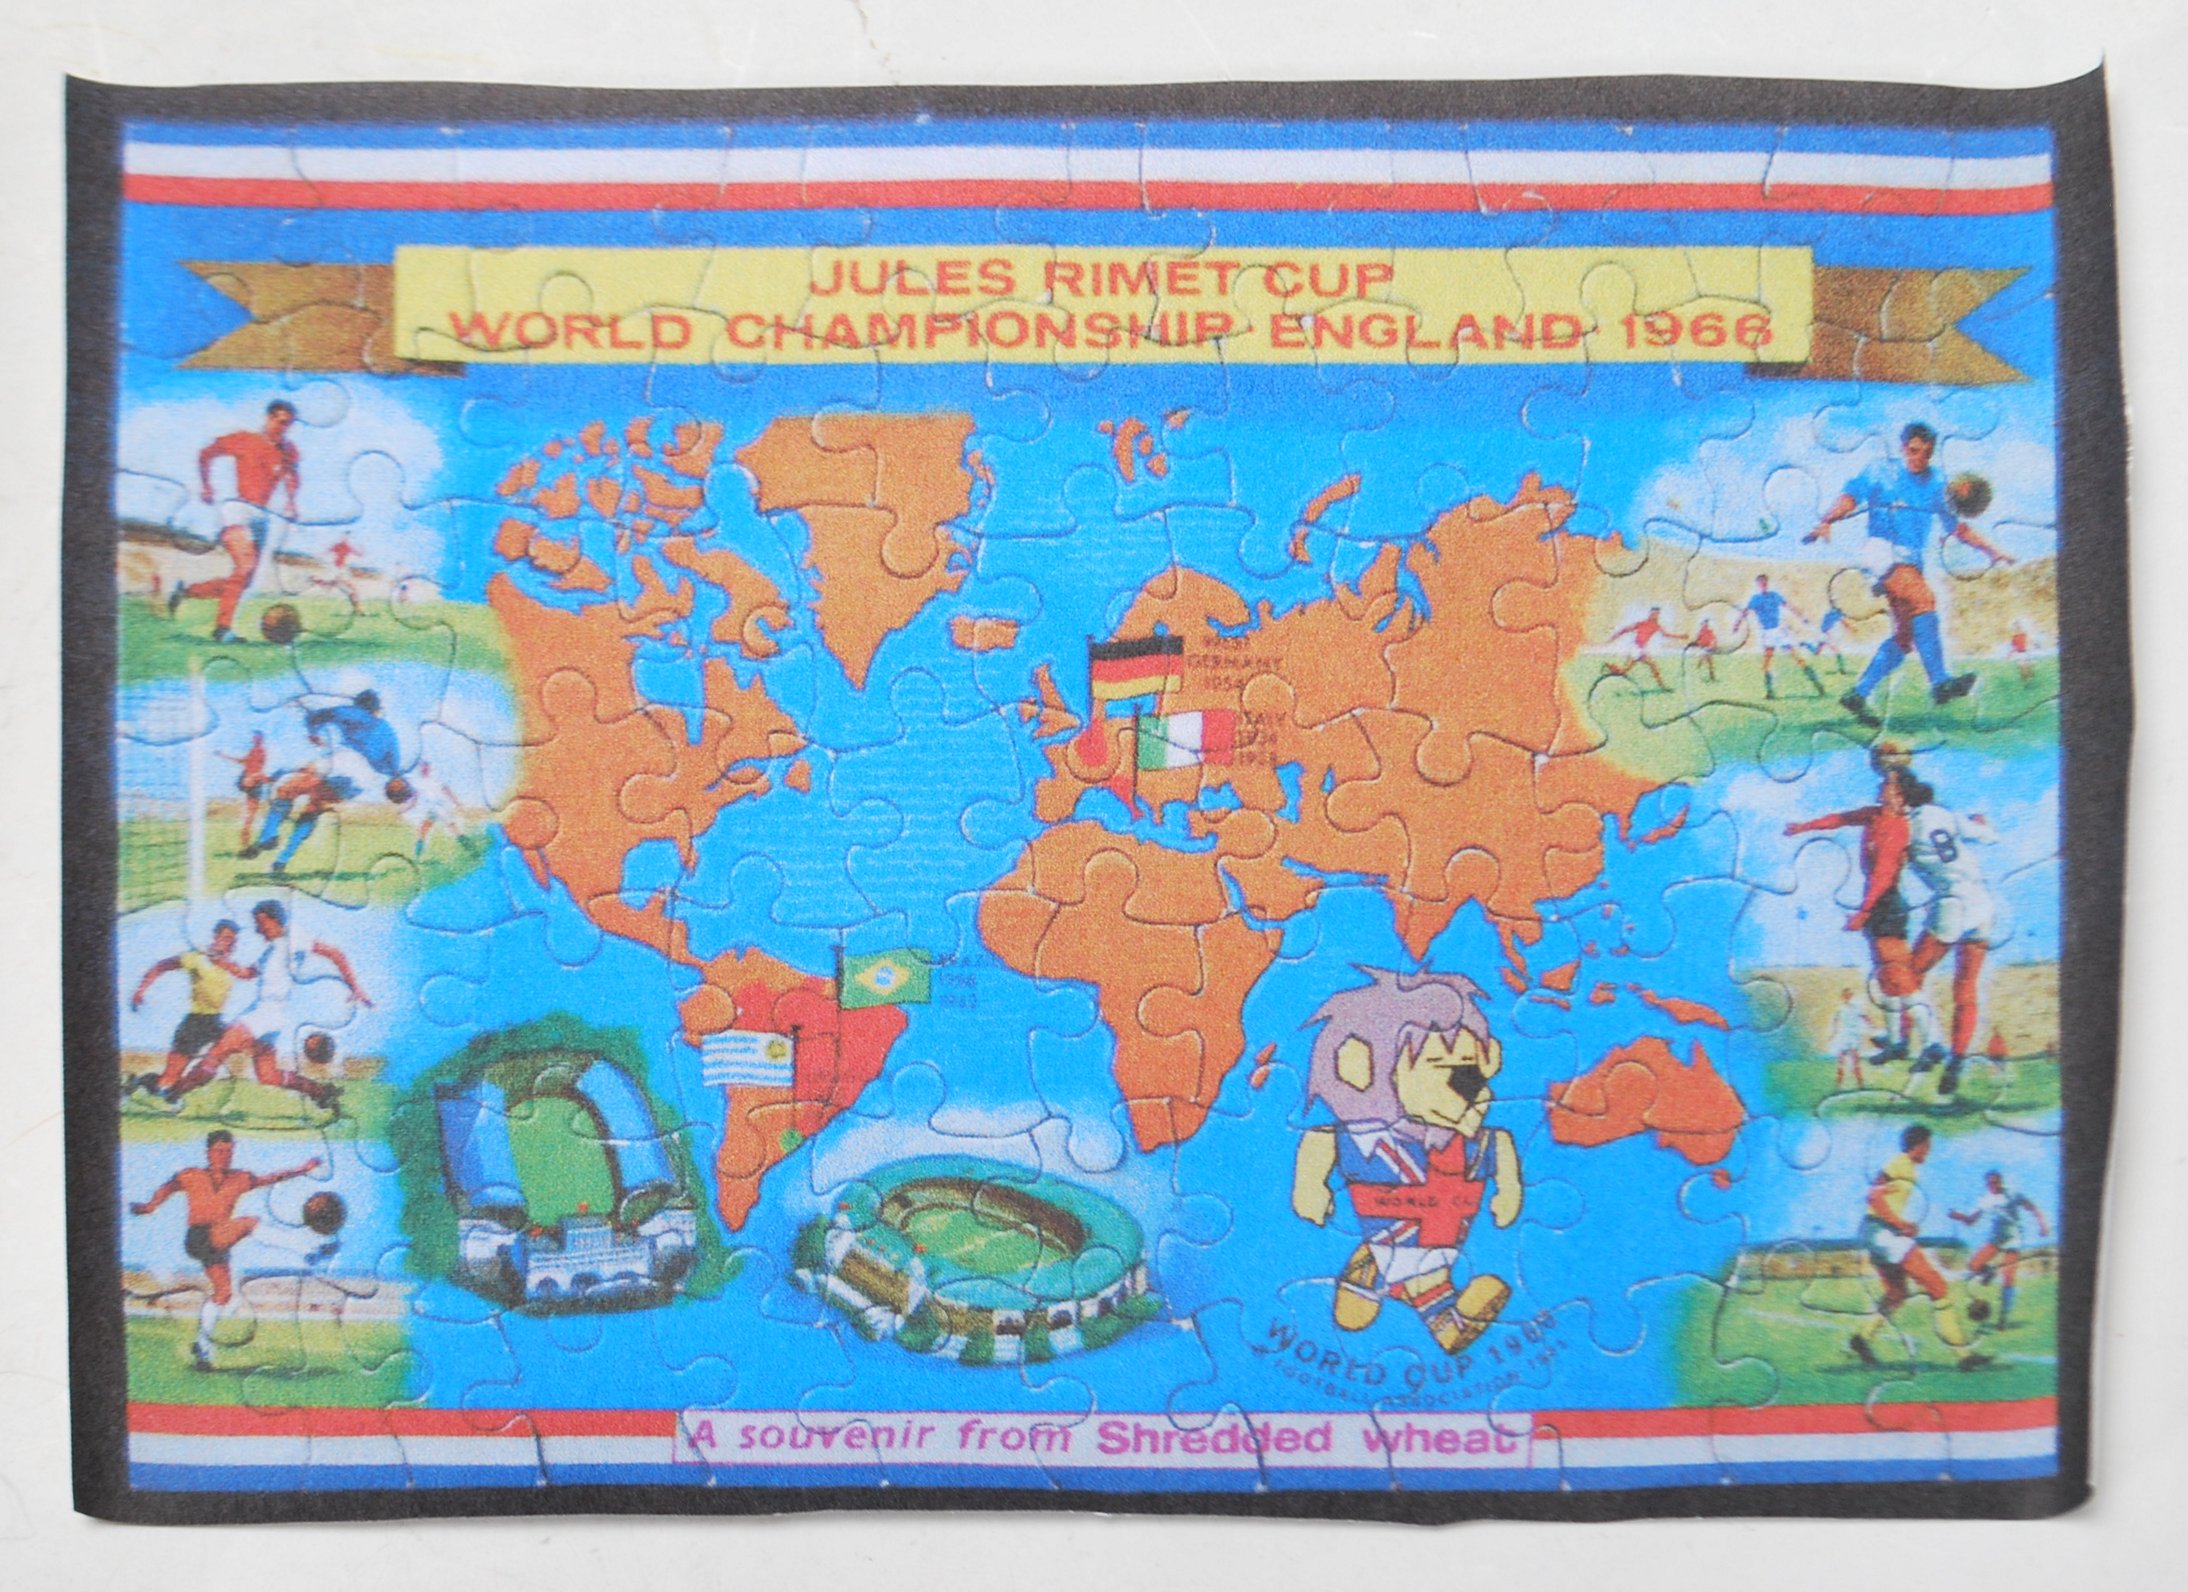 VINTAGE 1966 WORLD CUP ADVERTISING JIGSAW PUZZLE - Image 3 of 3